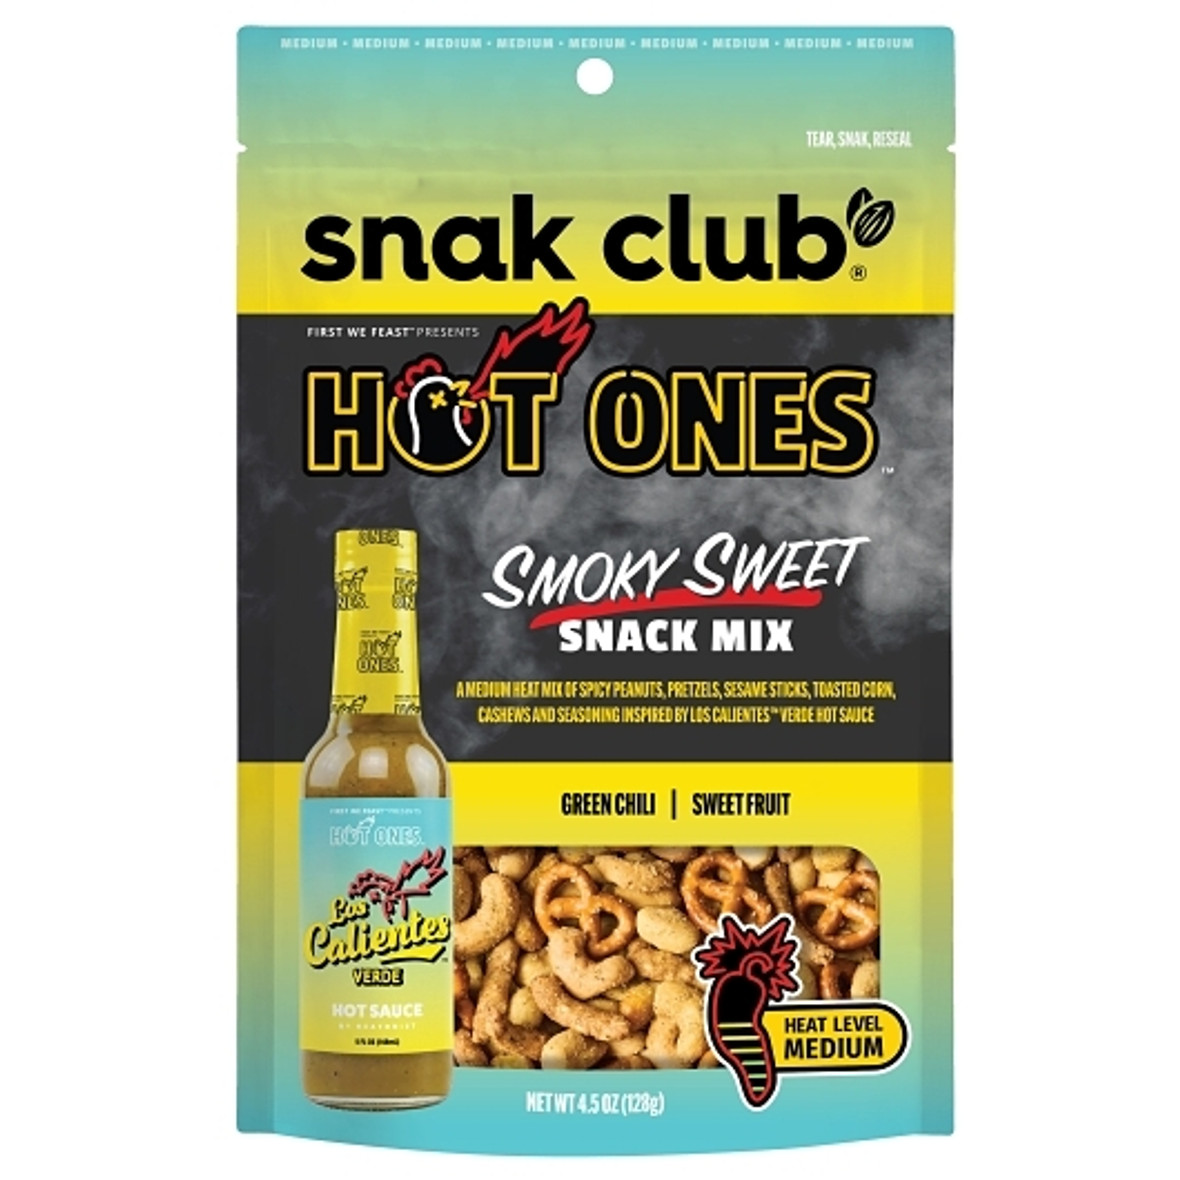 Snak Club Hot Ones Smoky Sweet Snack Mix, 10 Ounce, 6 Per Case